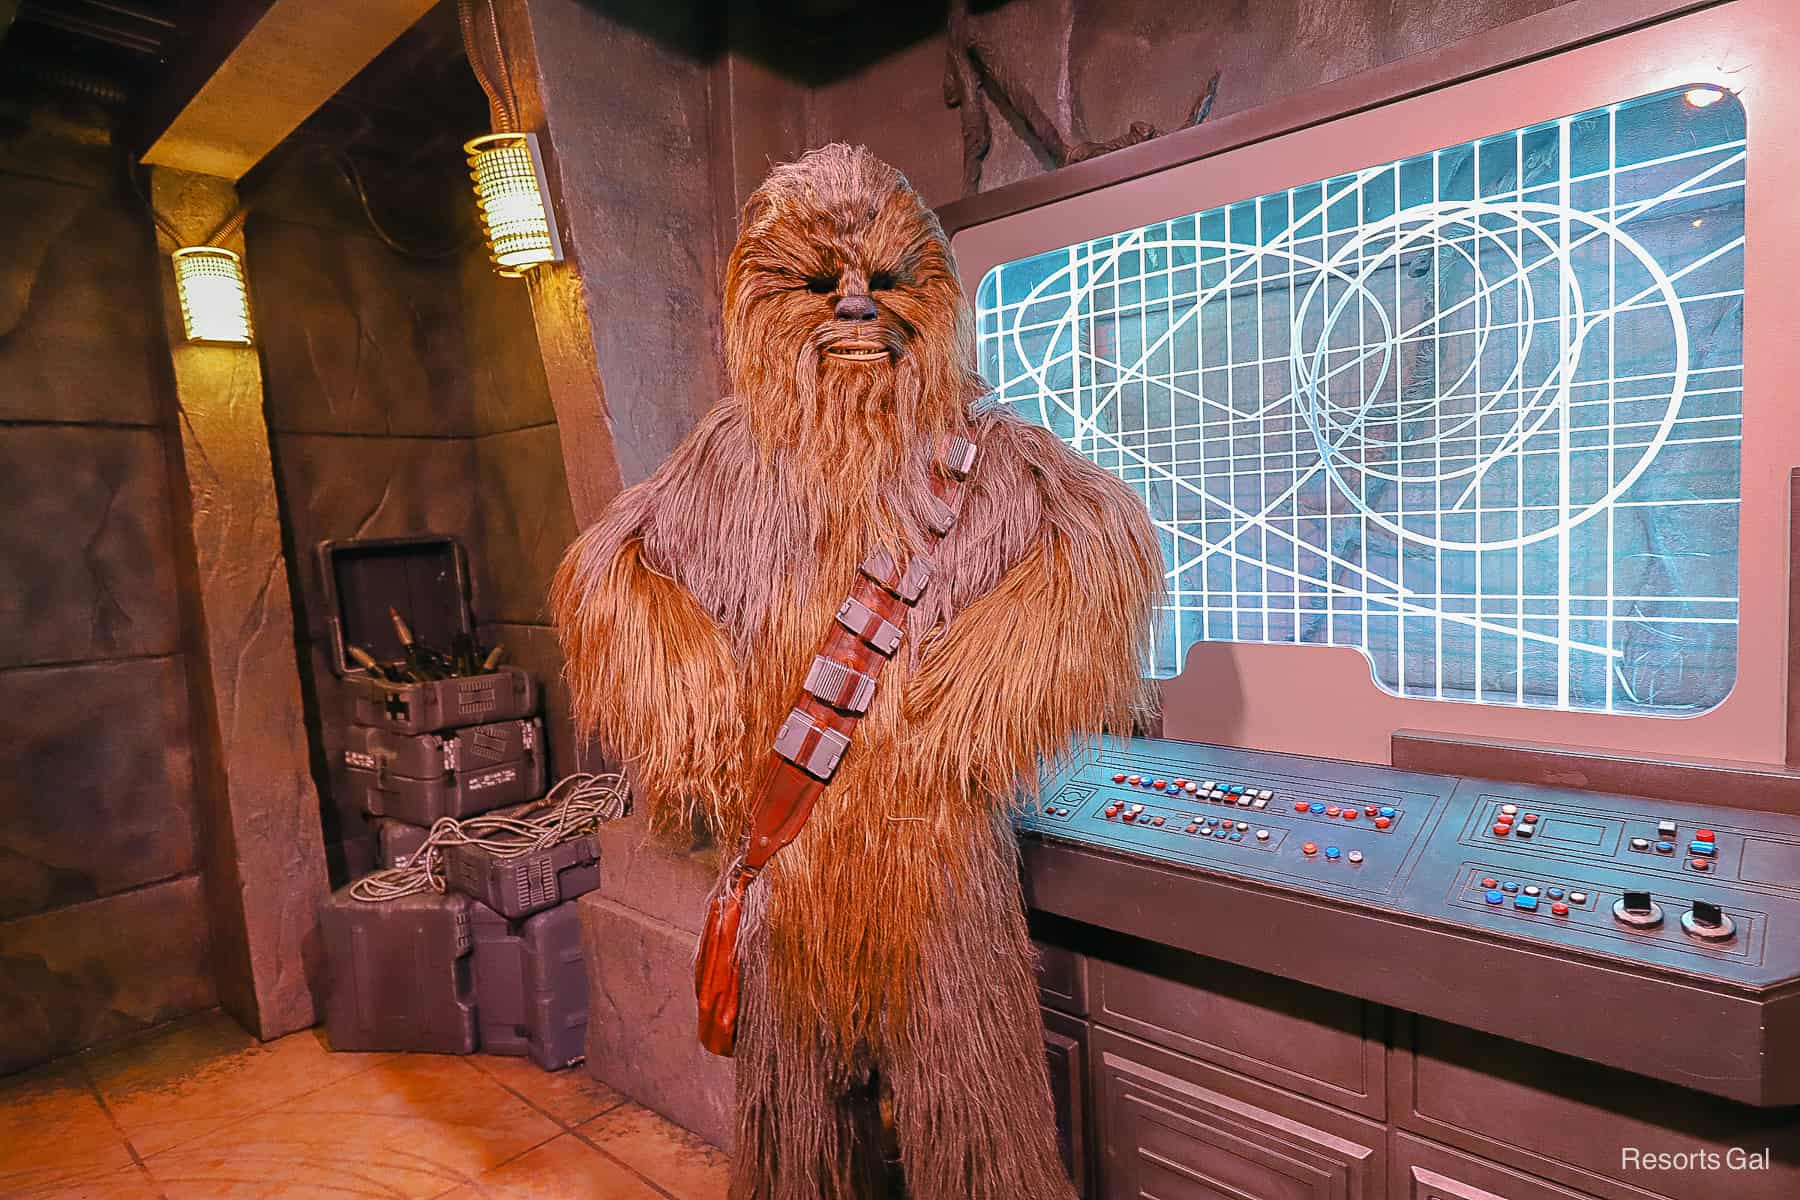 Chewbacca poses for a photo with hands on his hips. 